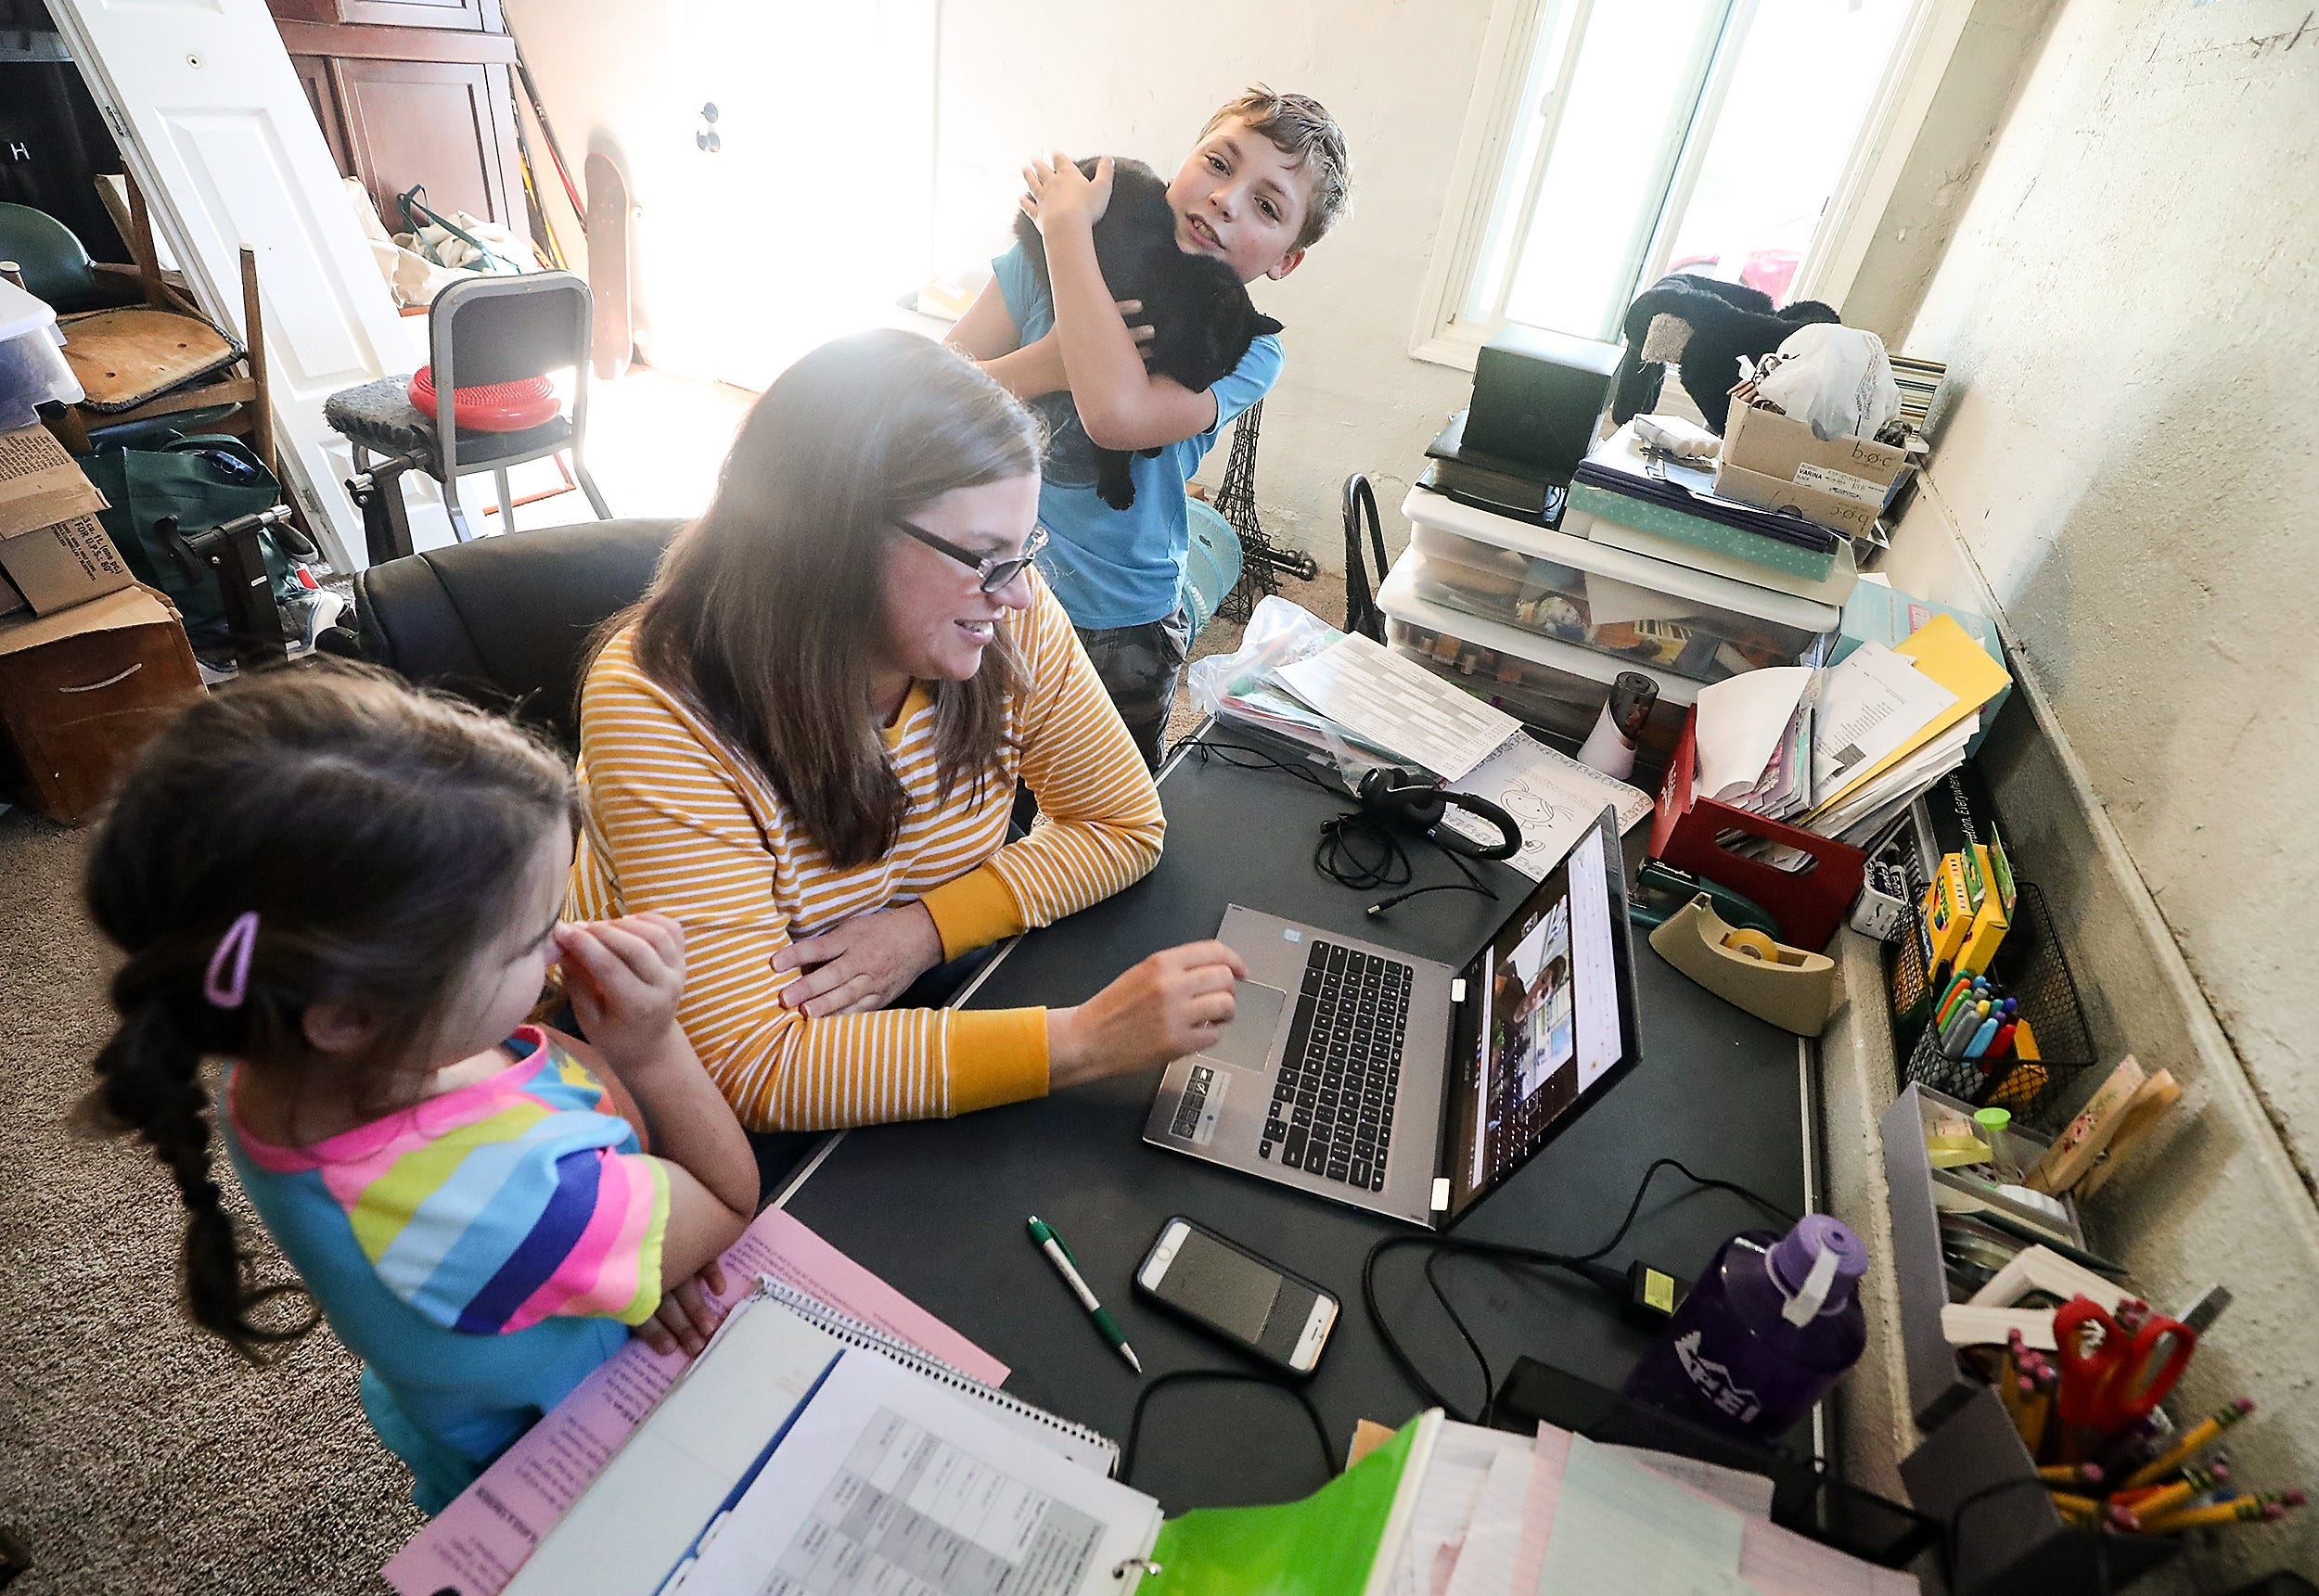 Mountain View Middle School teacher Anne Pedelaborde watches a video of one of her students introducing themselves as son Alex and daughter Emma gather around her desk in the basement of the family's home in Bremerton, Wash. on Wednesday, Sept. 2, 2020.